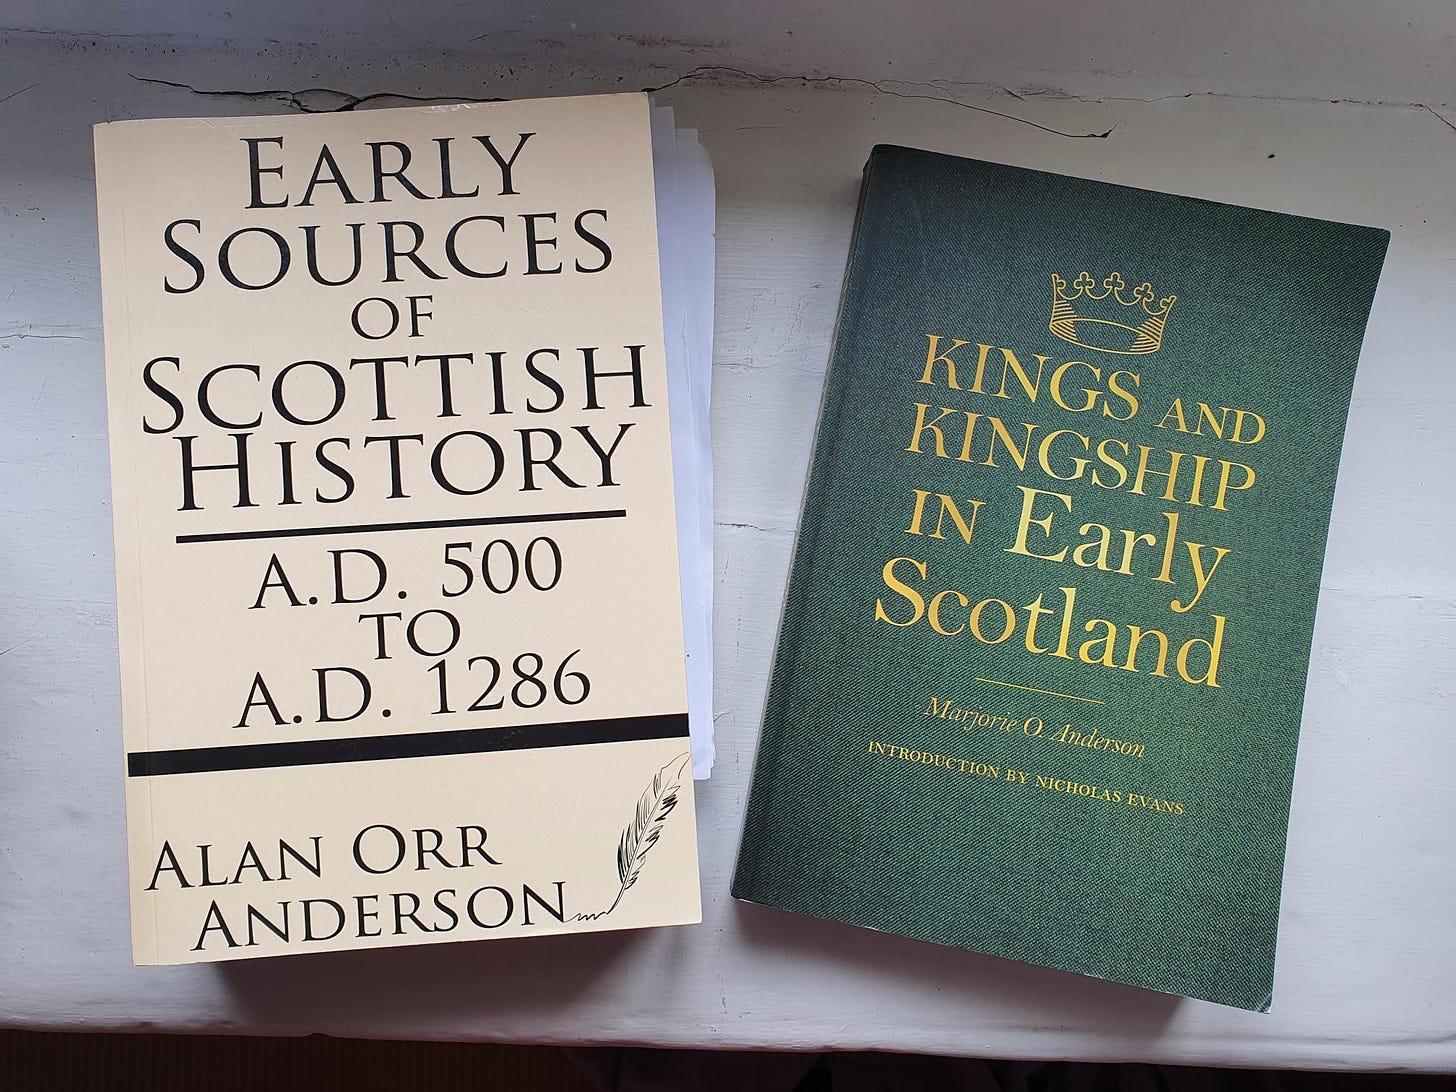 Photo of two reference books: Early Sources of Scottish History by Alan Orr Anderson, and Kings and Kingship in Early Scotland by Marjorie Orr Anderson